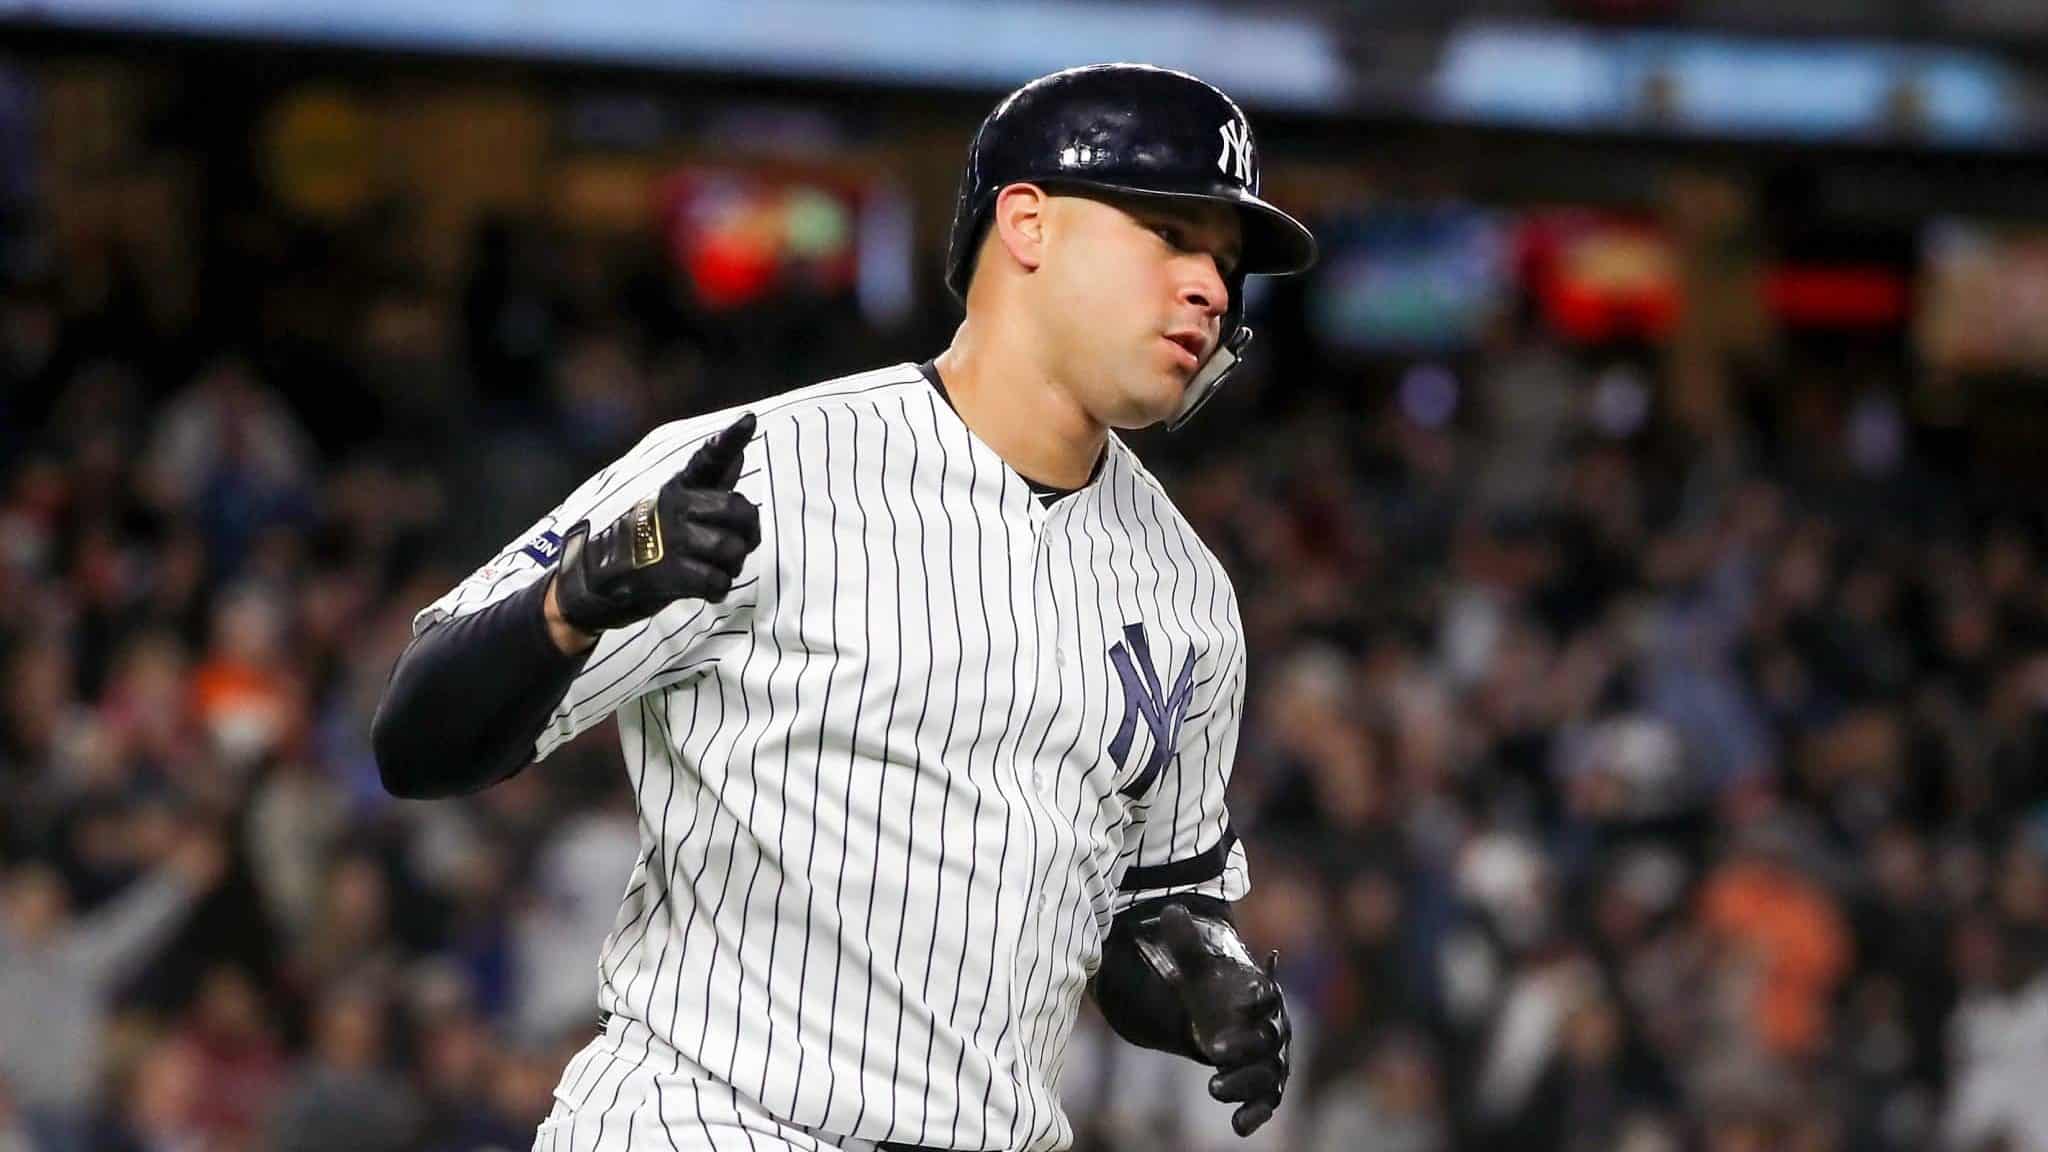 NEW YORK, NEW YORK - OCTOBER 17: Gary Sanchez #24 of the New York Yankees rounds the bases as he hits a two-run home run against the Houston Astros during the sixth inning in game four of the American League Championship Series at Yankee Stadium on October 17, 2019 in New York City.